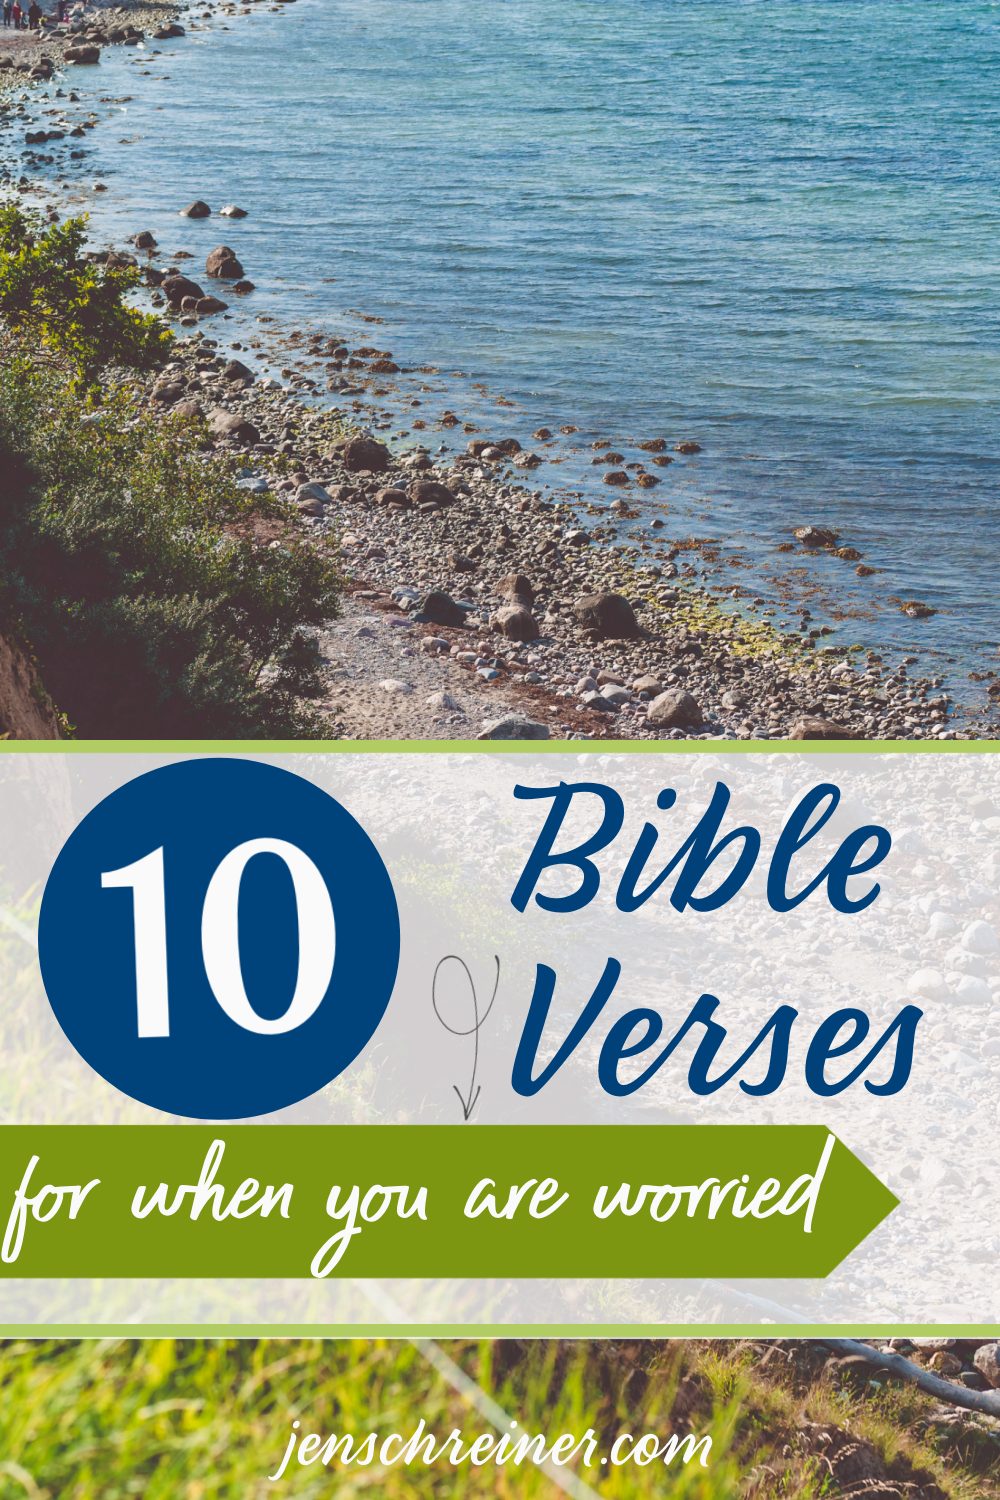 10 bible verses for when you are worries